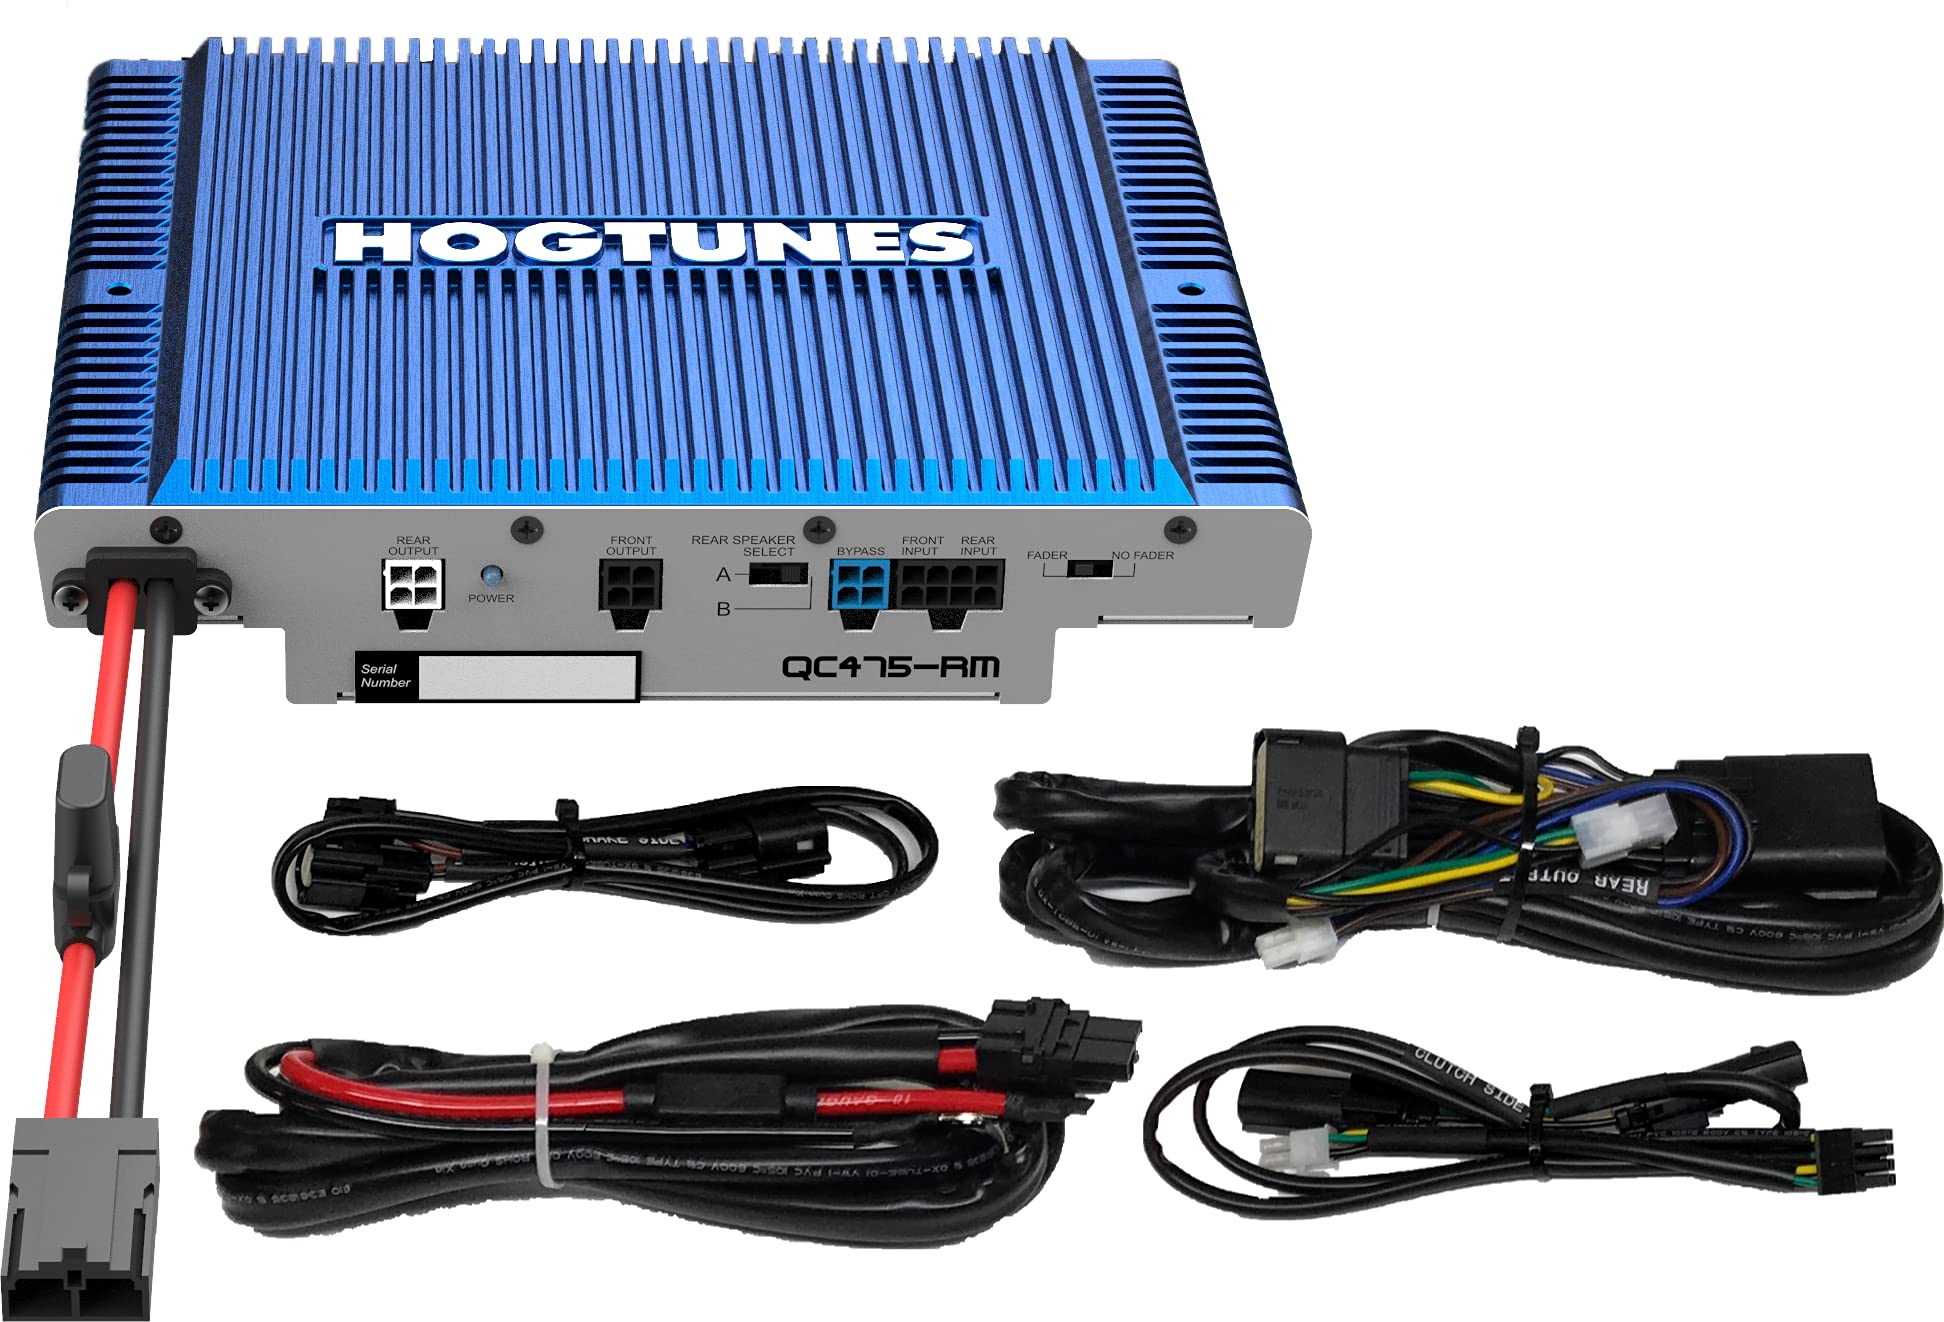 Hogtunes QC 475-RM 300 Watt 4 Channel Amplifier with R.E.M.I.T. Technology for 2014-Current Harley-Davidson Motorcycles